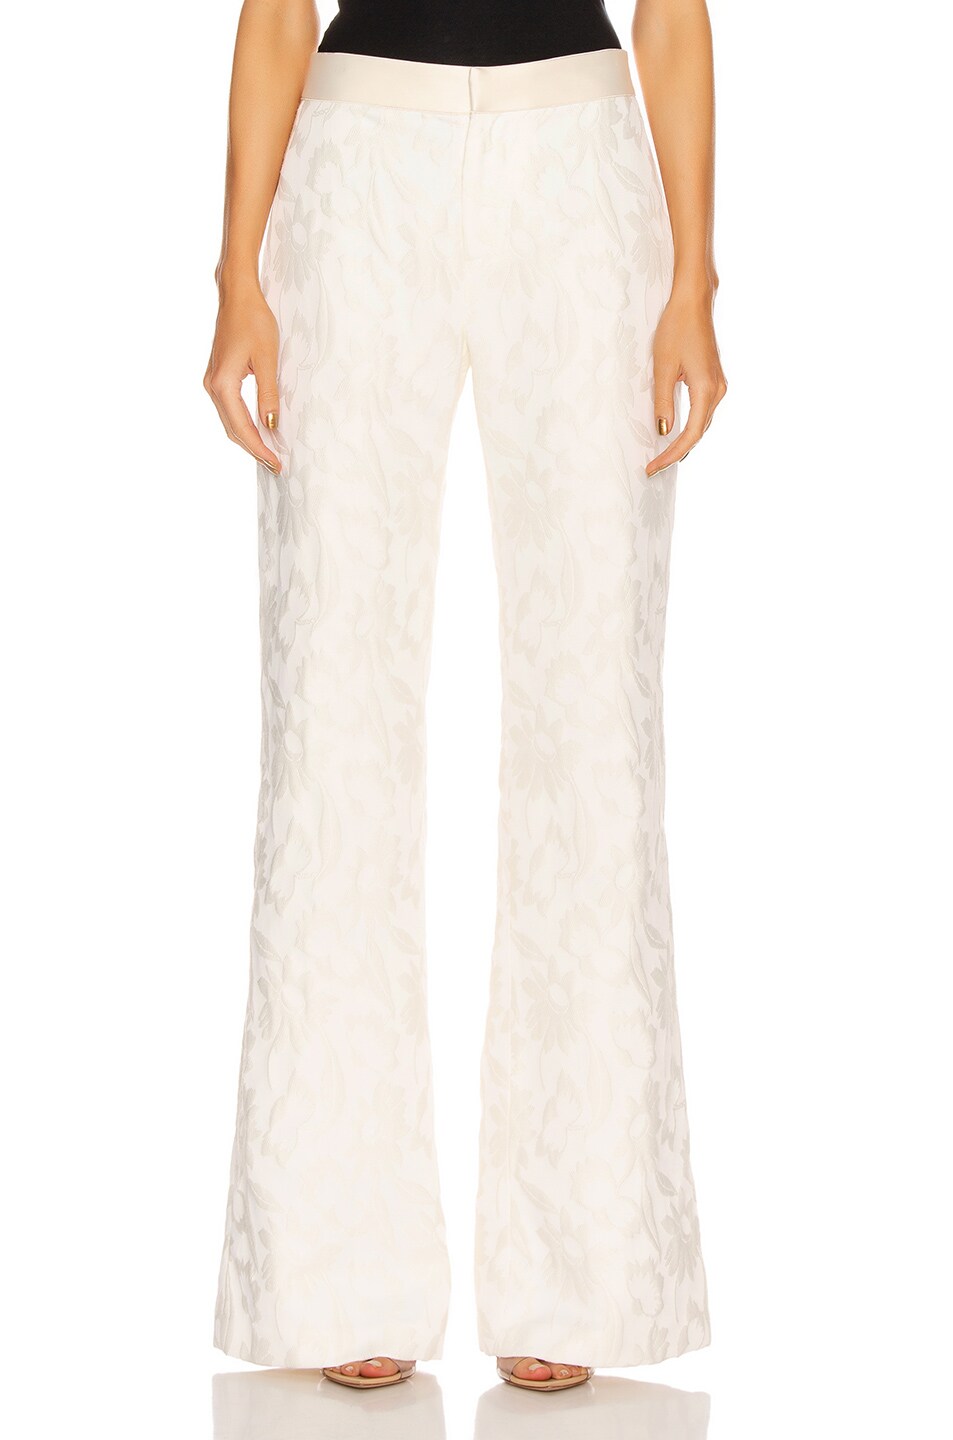 Image 1 of Alexis Bouras Pant in White Floral Jacquard